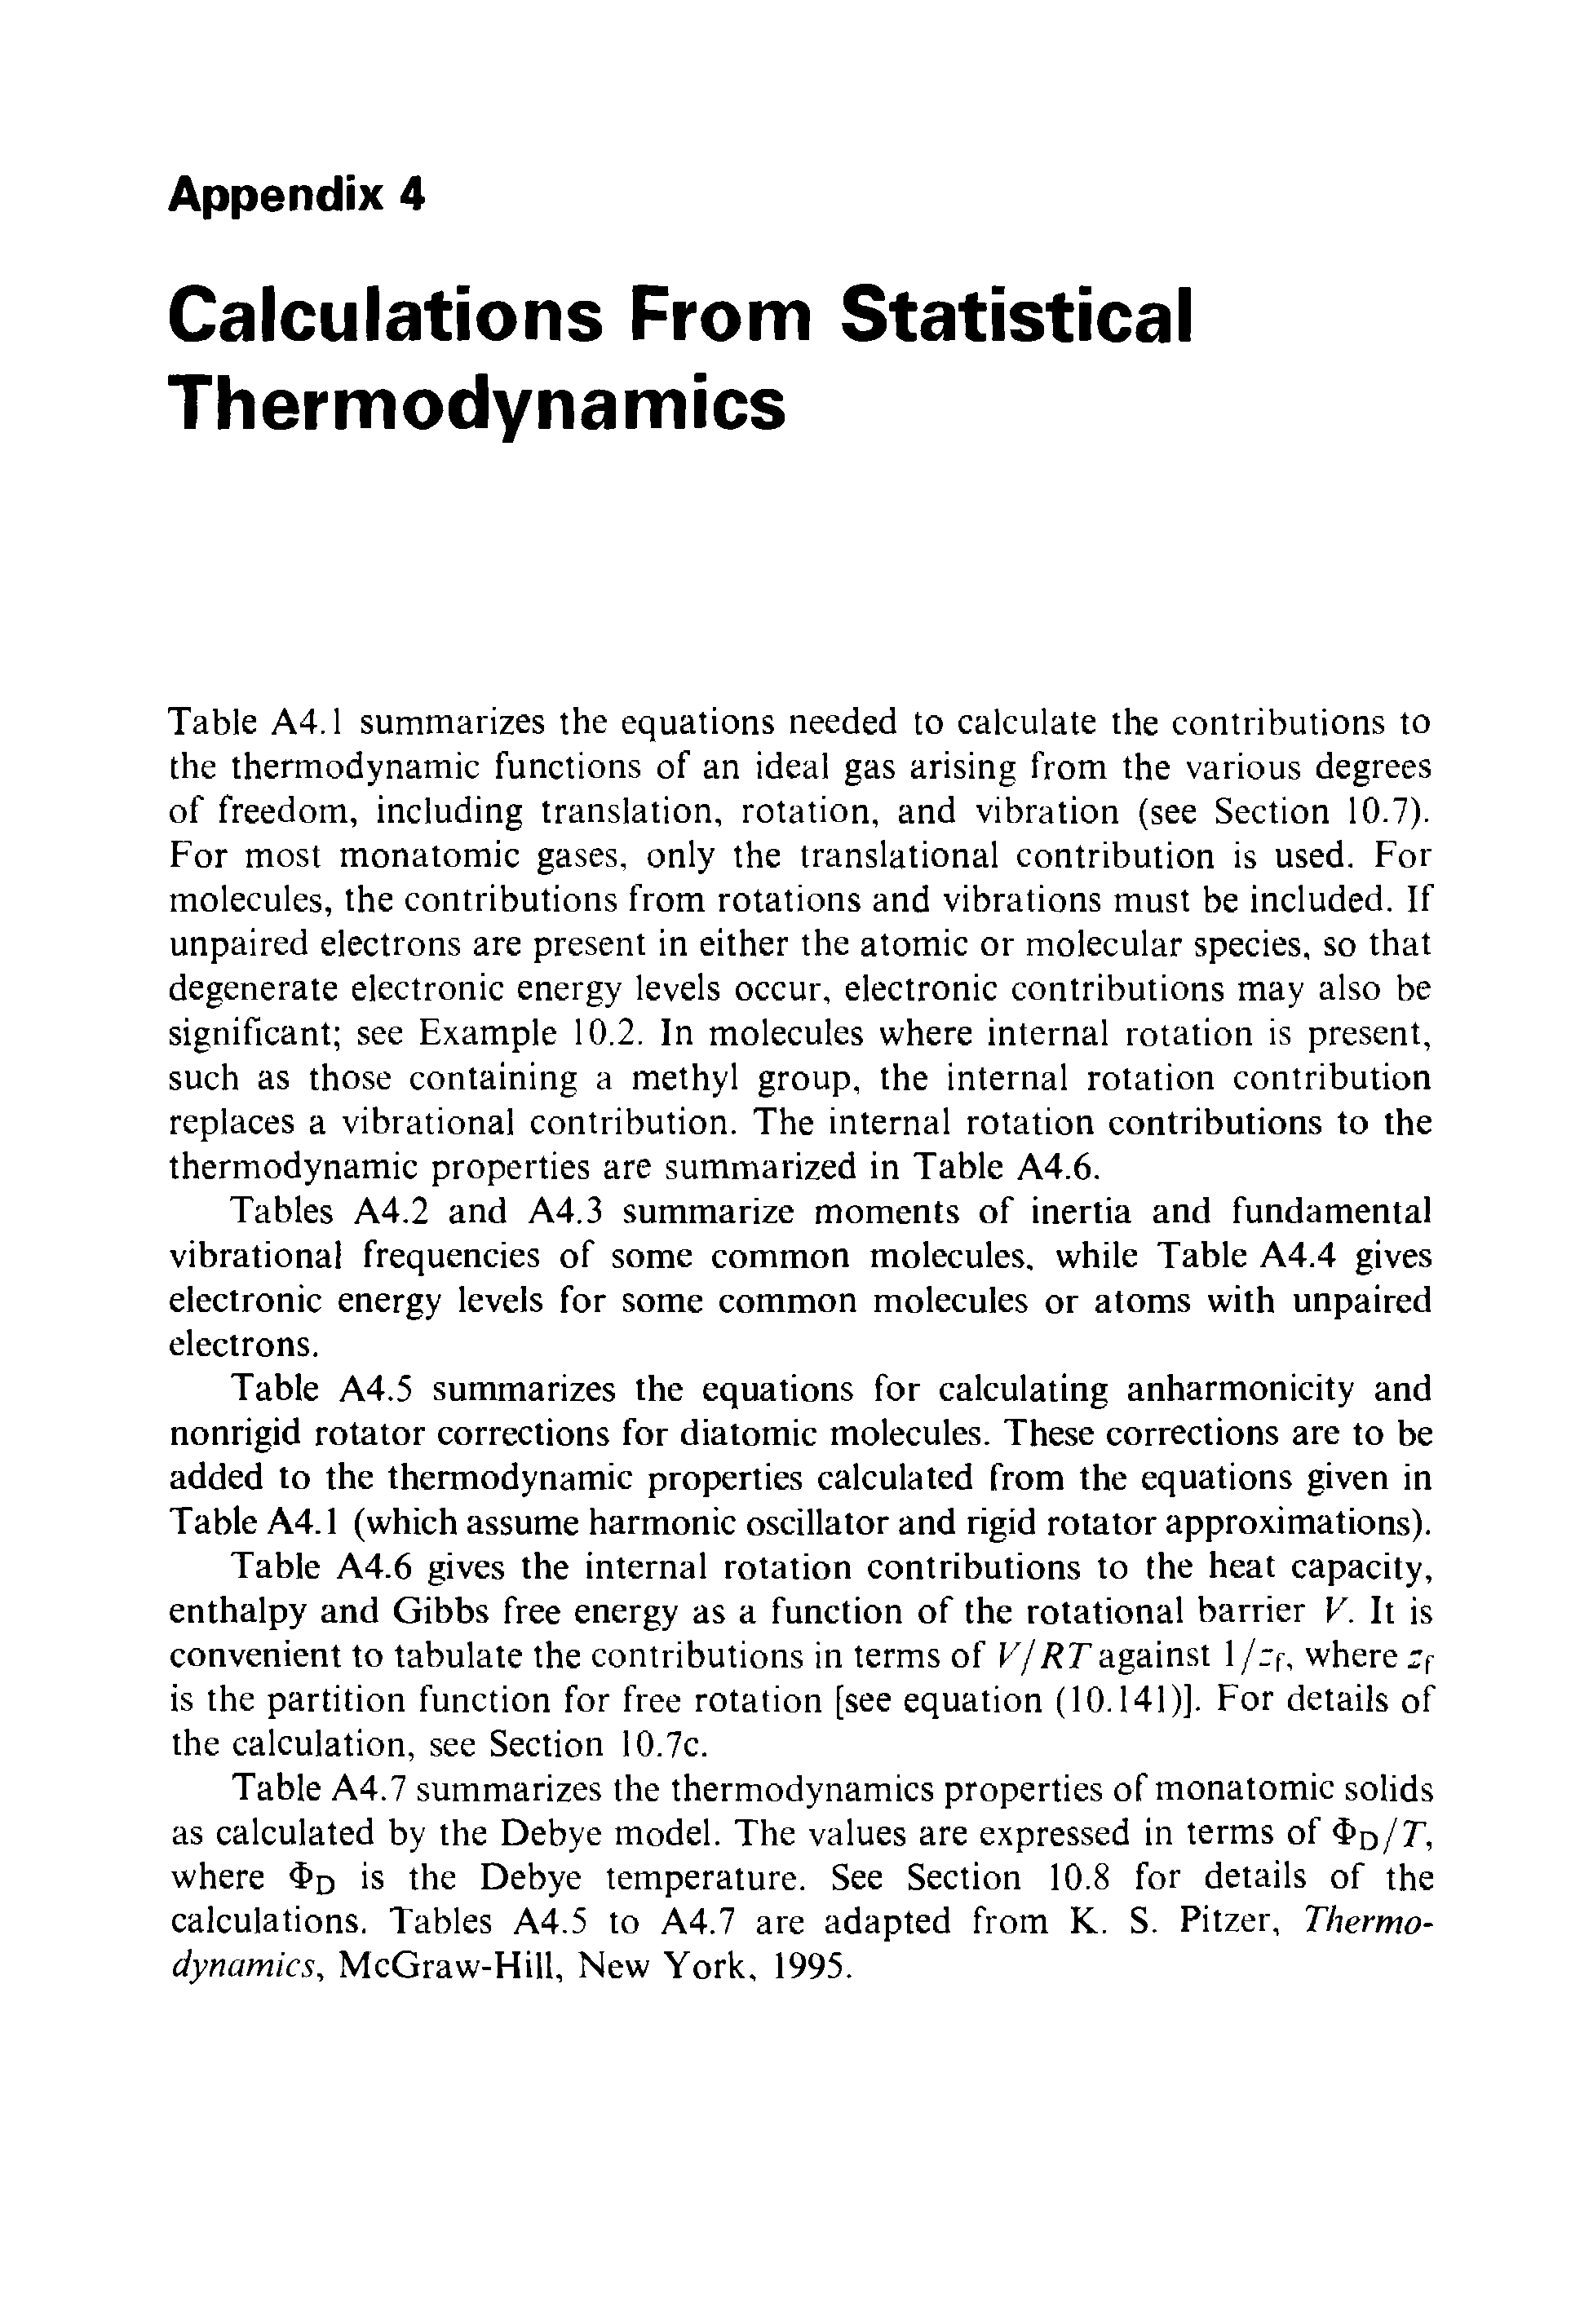 Table A4.5 summarizes the equations for calculating anharmonicity and nonrigid rotator corrections for diatomic molecules. These corrections are to be added to the thermodynamic properties calculated from the equations given in Table A4.1 (which assume harmonic oscillator and rigid rotator approximations).